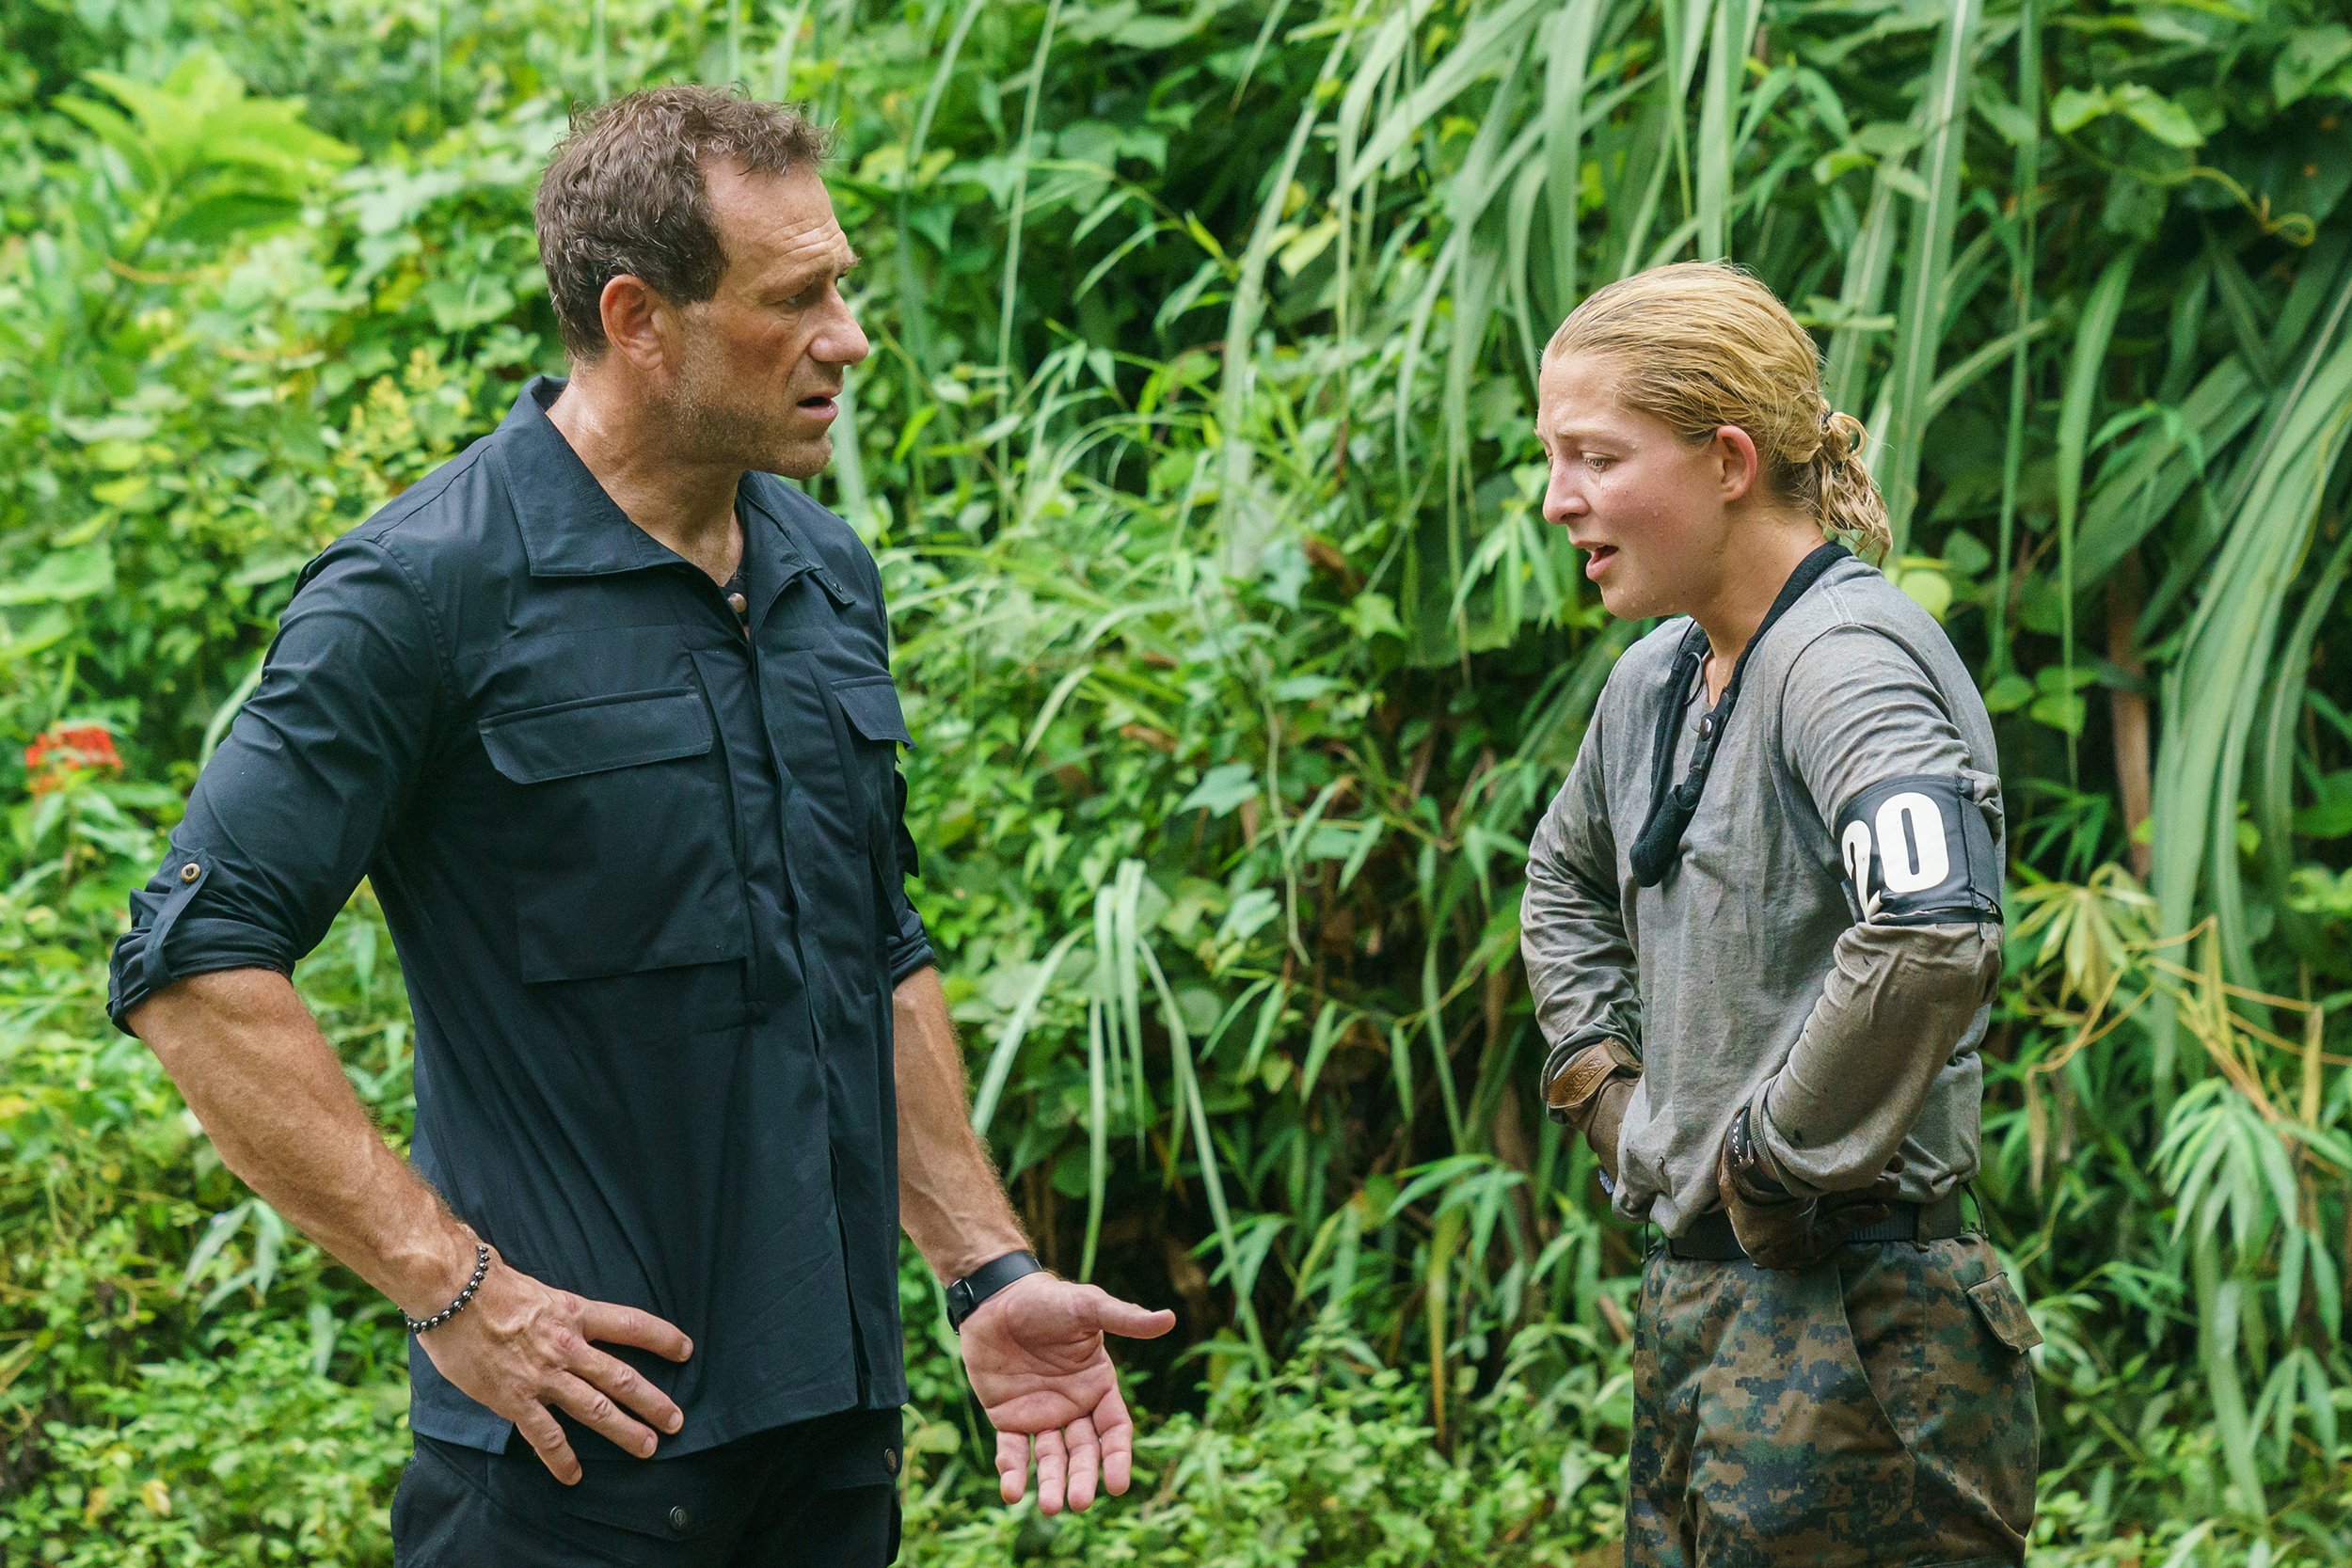  Recruit No 20: Charlotte and Jason Fox - Jungle beasting  Episode 1: Fear  Minnow Films / Channel 4 